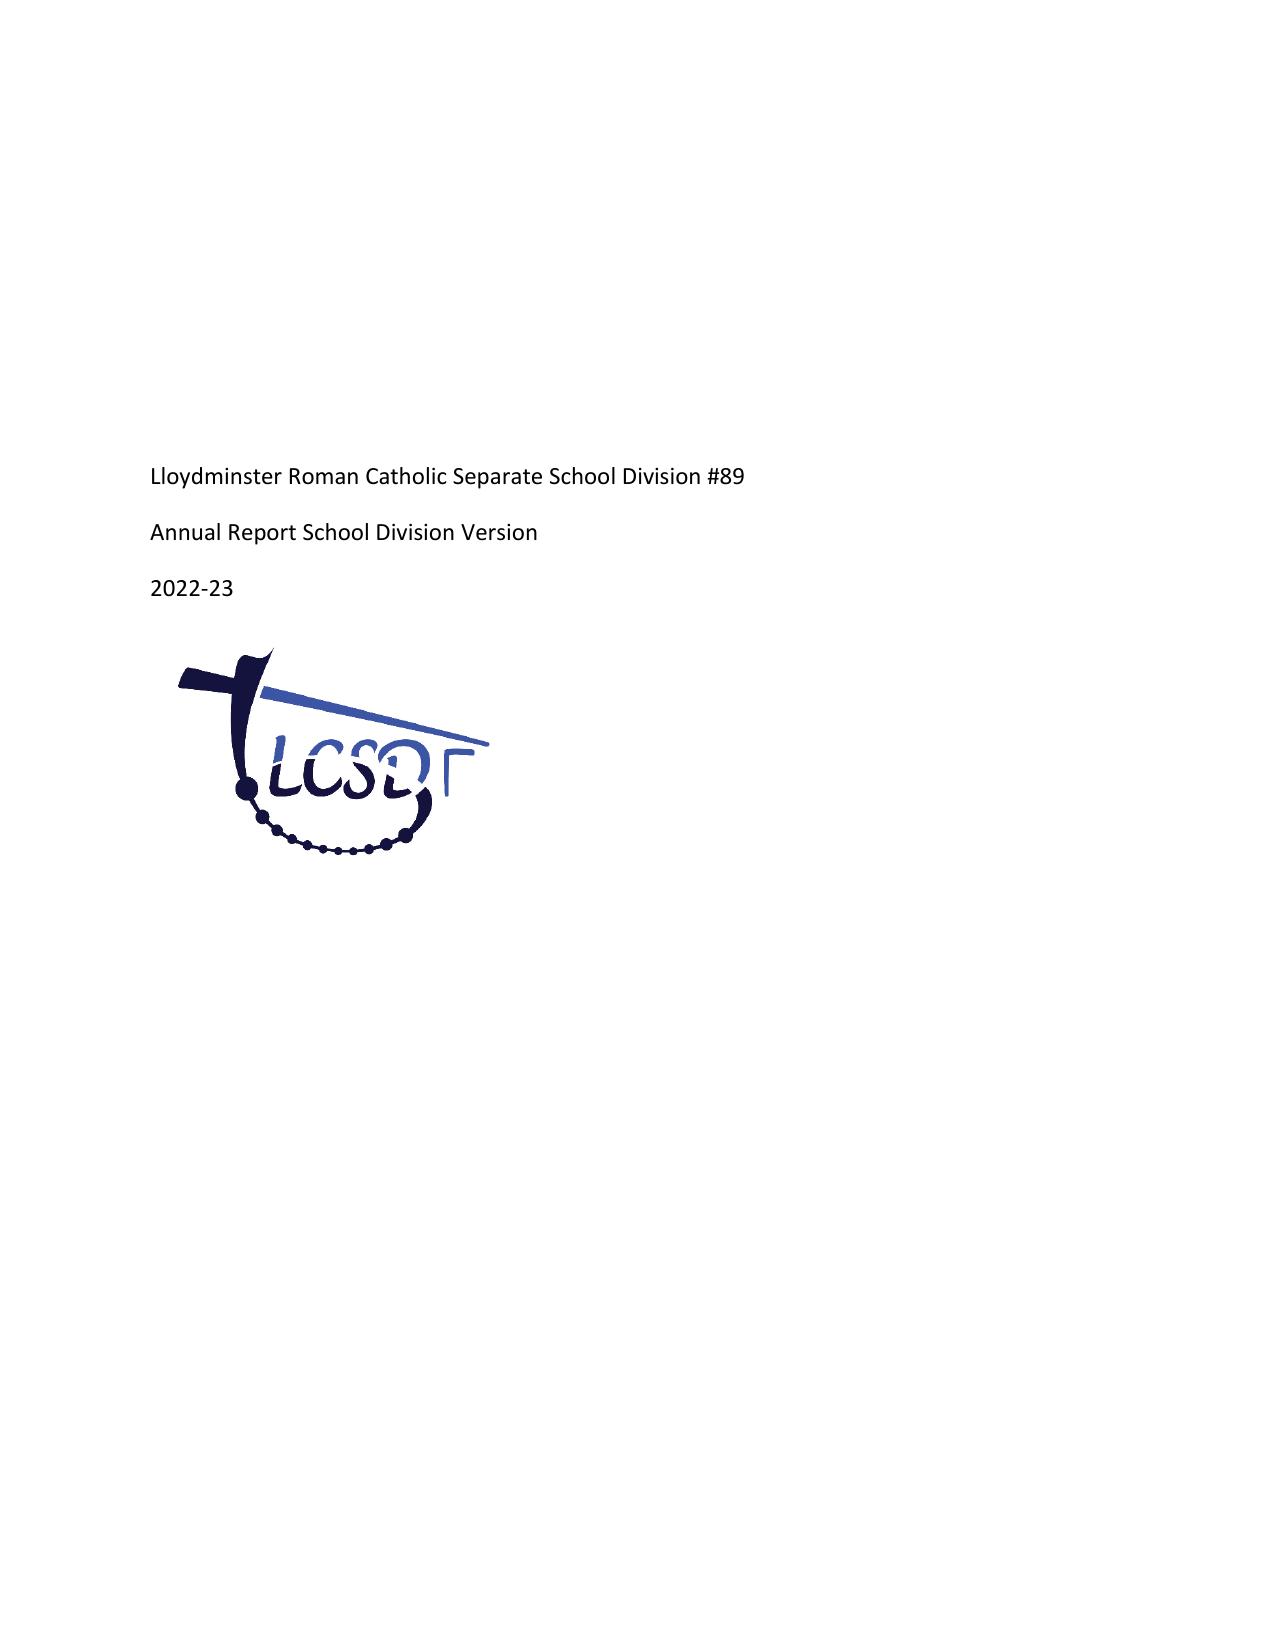 LCSD 2022 Annual Report